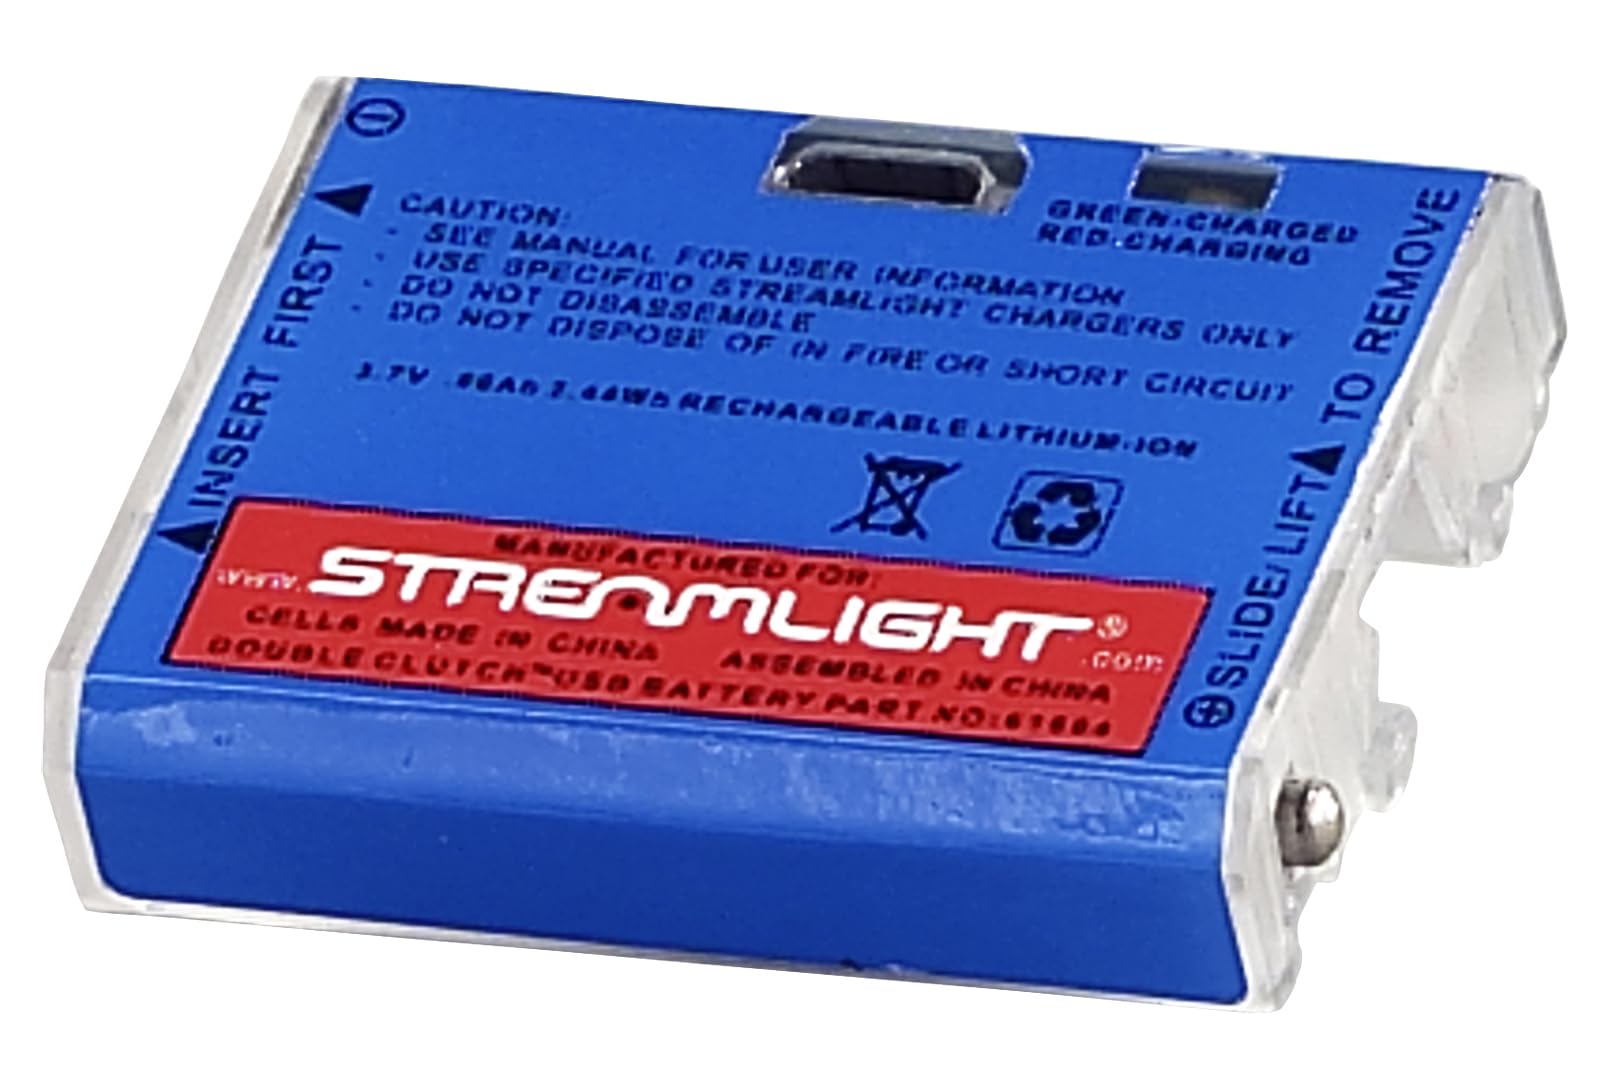 Streamlight 61604 Double Clutch Usb Lithium Polymer Battery